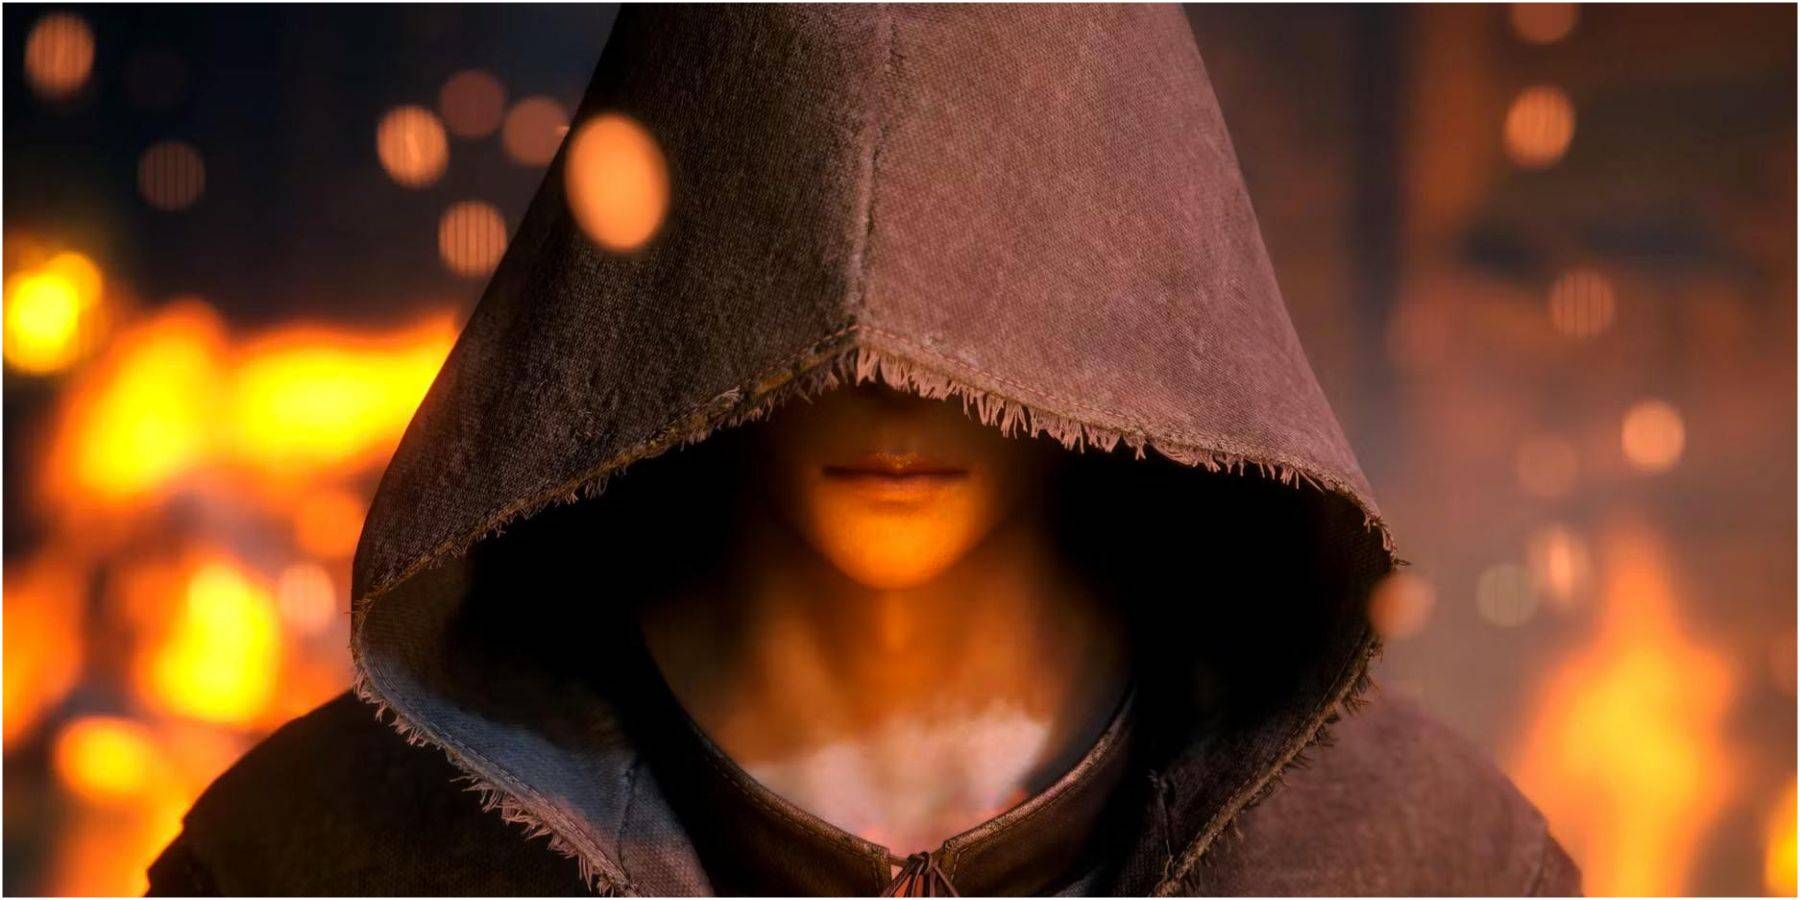 Final Fantasy 16: Who is the Hooded Man?